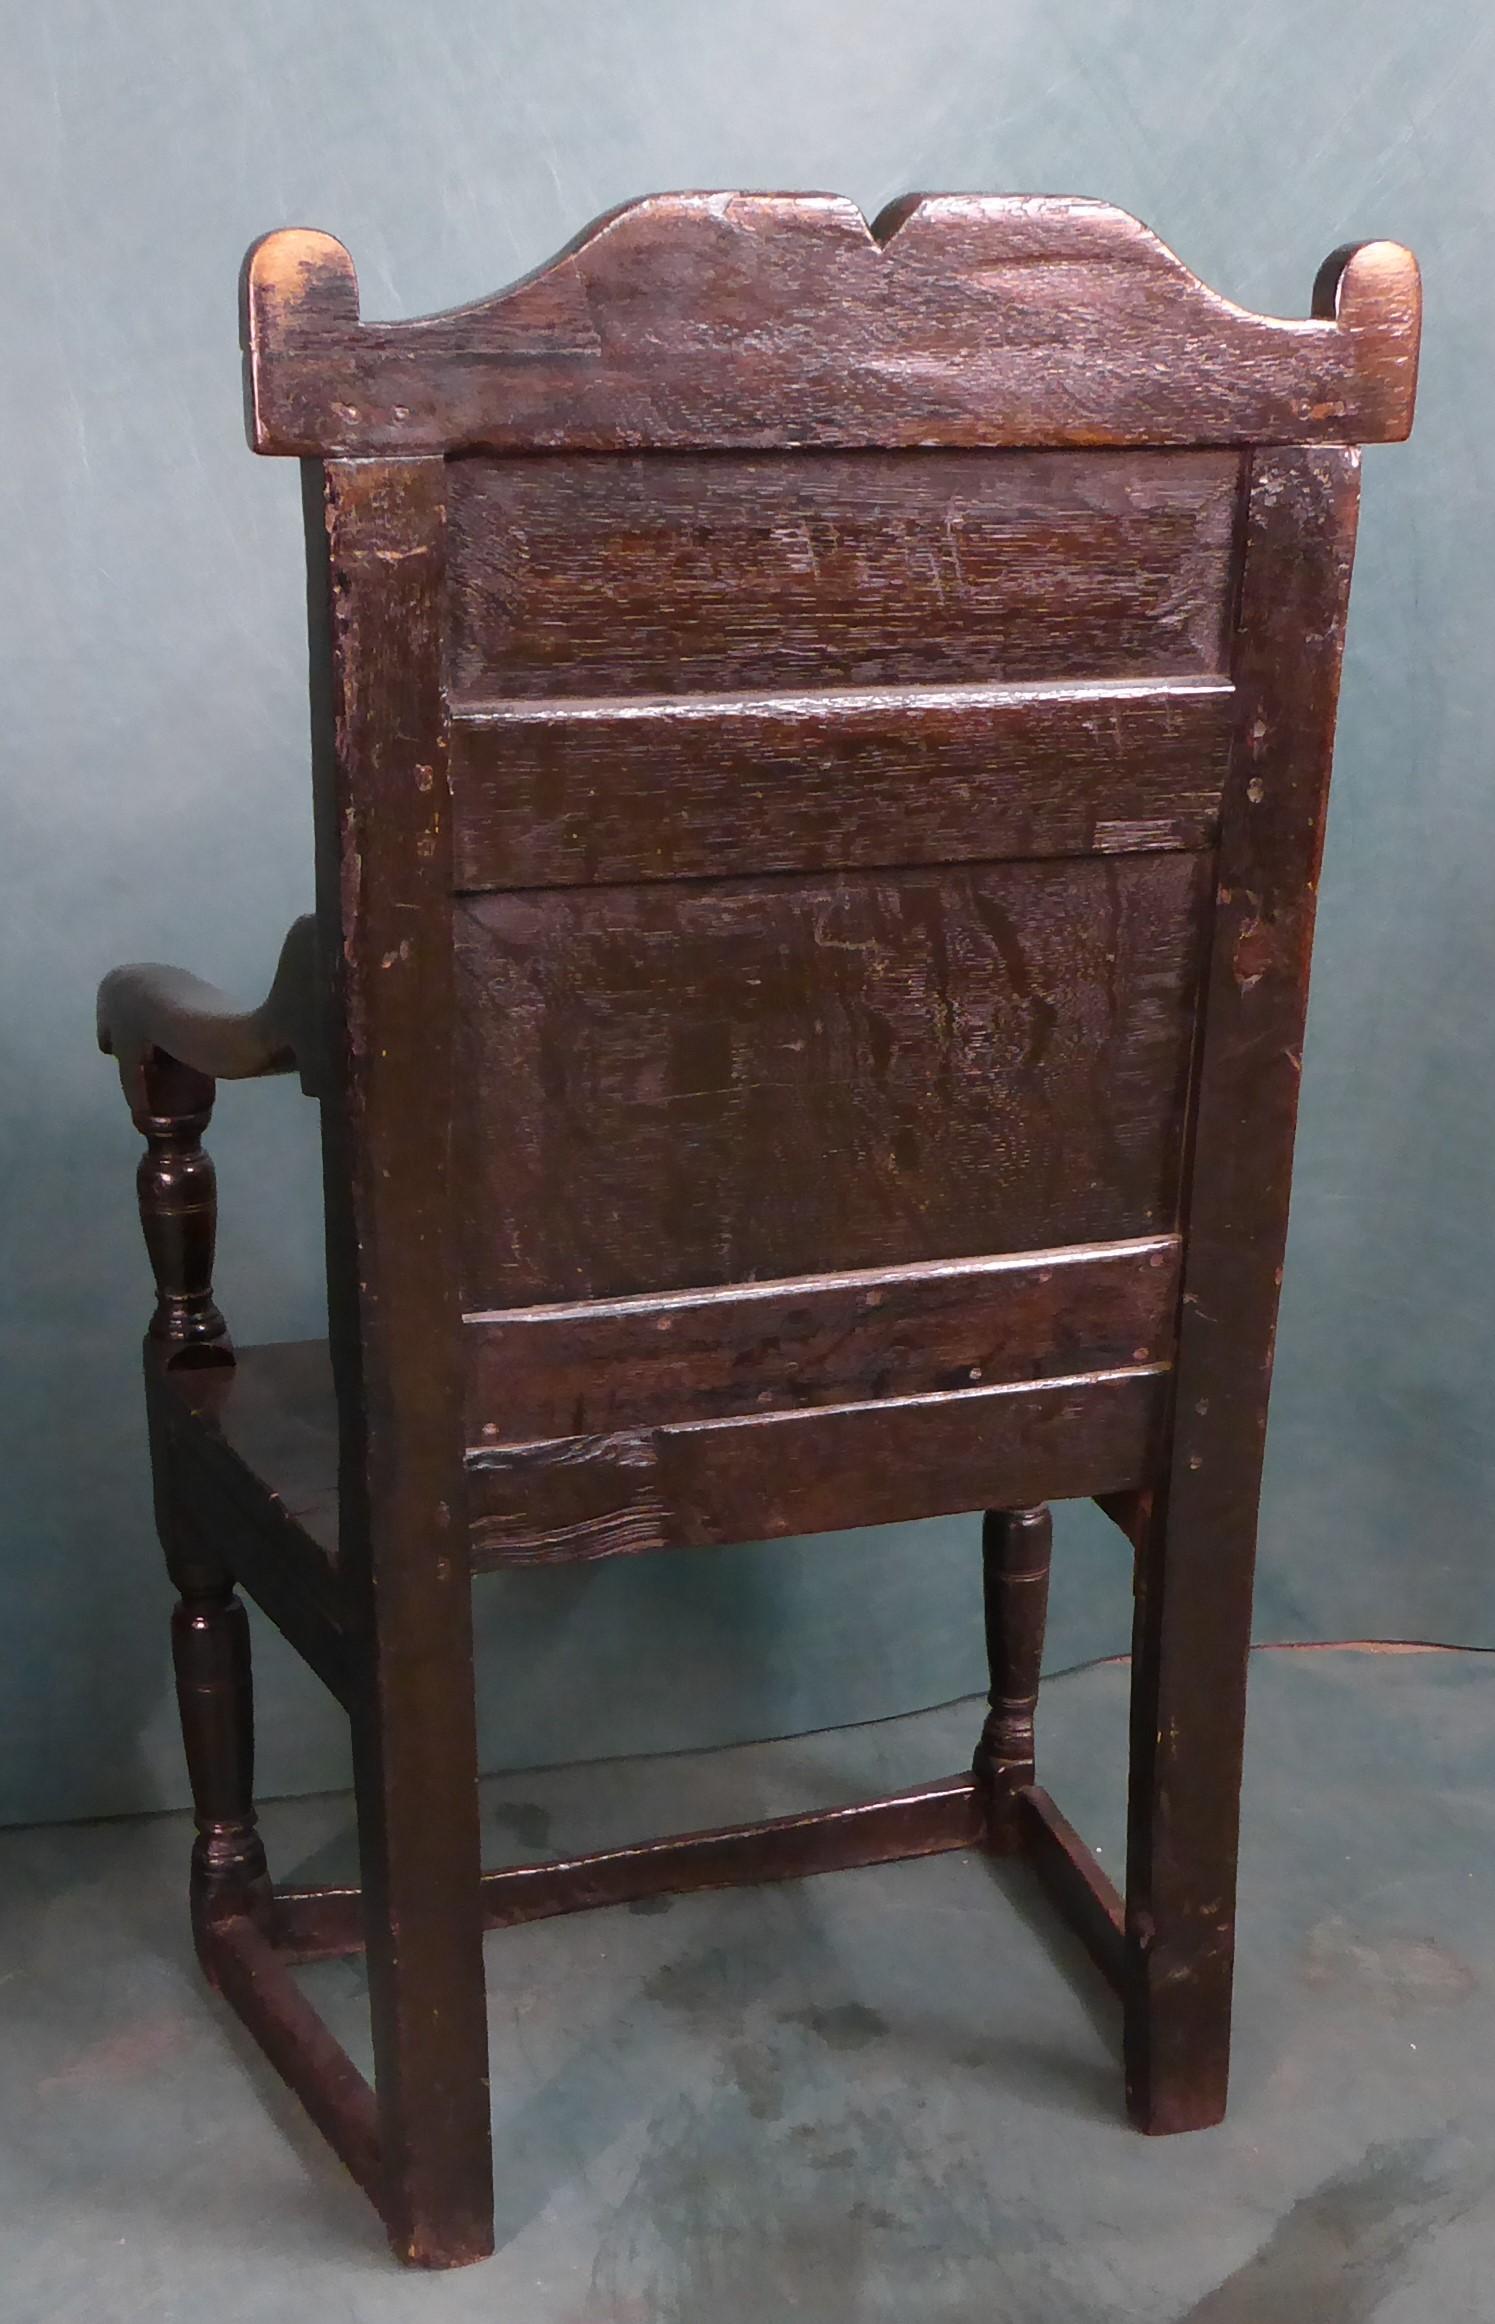 A good 17th century oak chair with carved back and original patina of a lovely attained gloss , the chair glows of age with beauty.   The Chair would have been higher however due to wear over the years on stone floors much used and loved which is